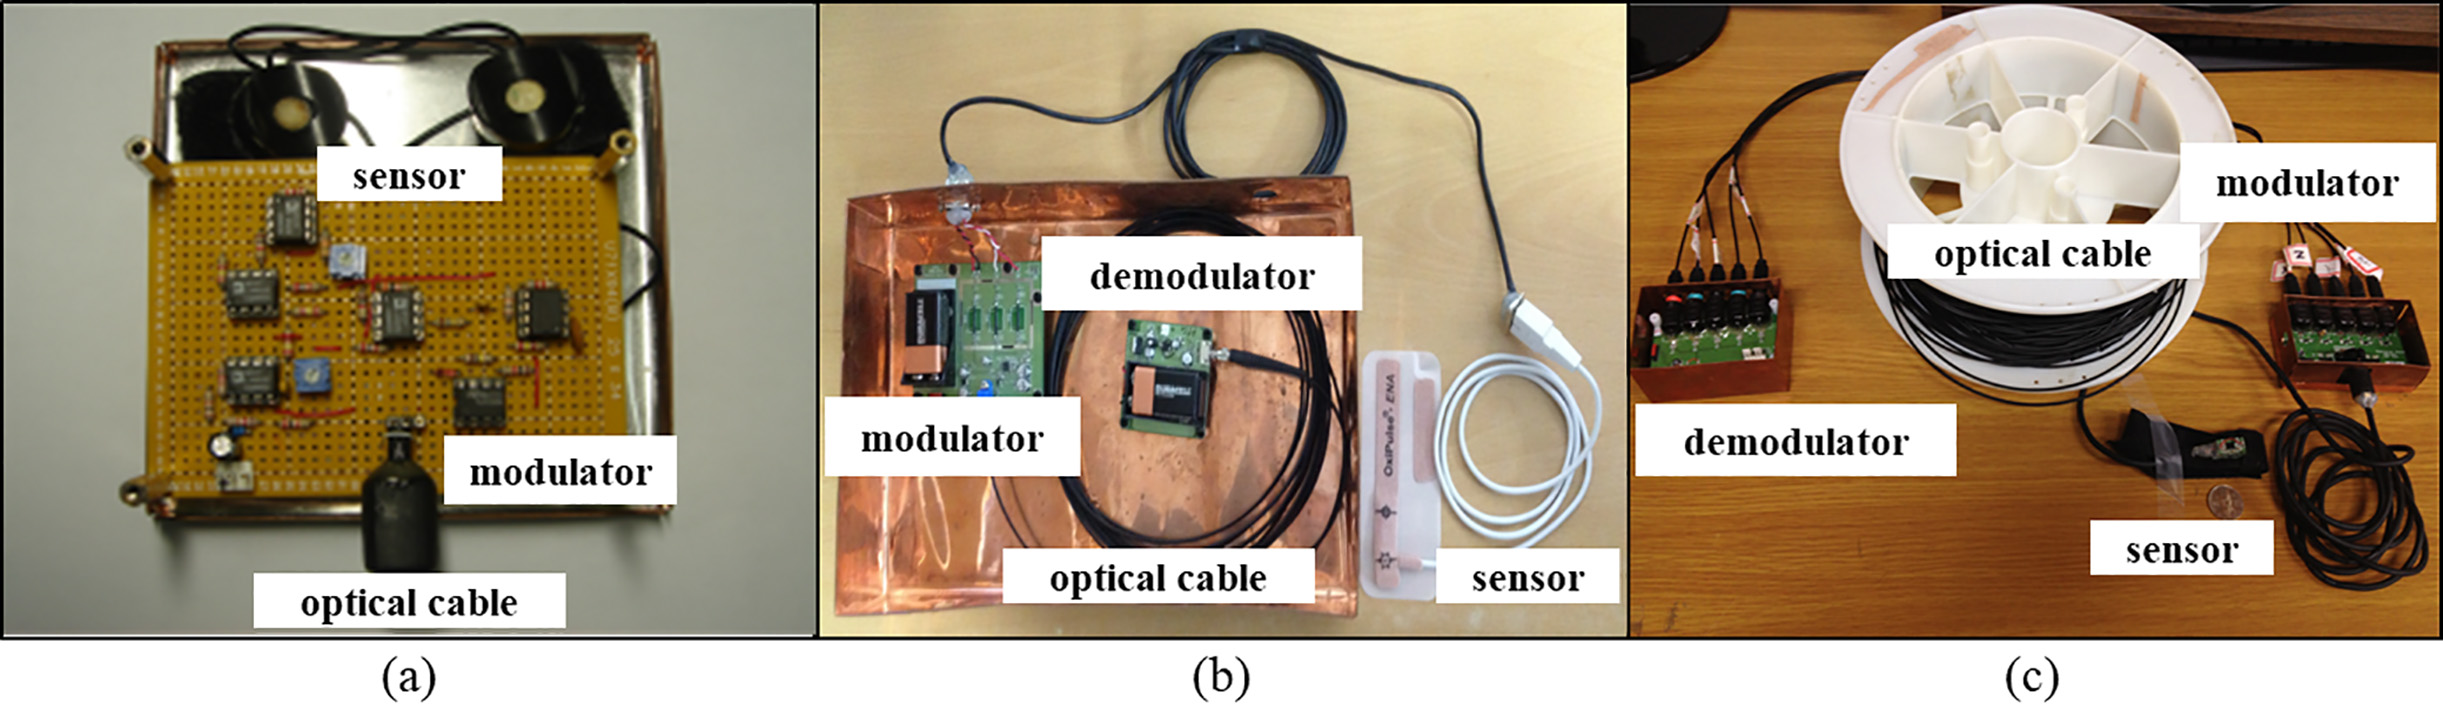 Components of the physiological and kinematic signal measurement systems. (a) Skin conductance level system, (b) photoplethysmographic (PPG) system, and (c) 3-axis accelerometer plus 2-axis gyroscope. Sensors, modulators, optical cables, and demodulators are common to all.